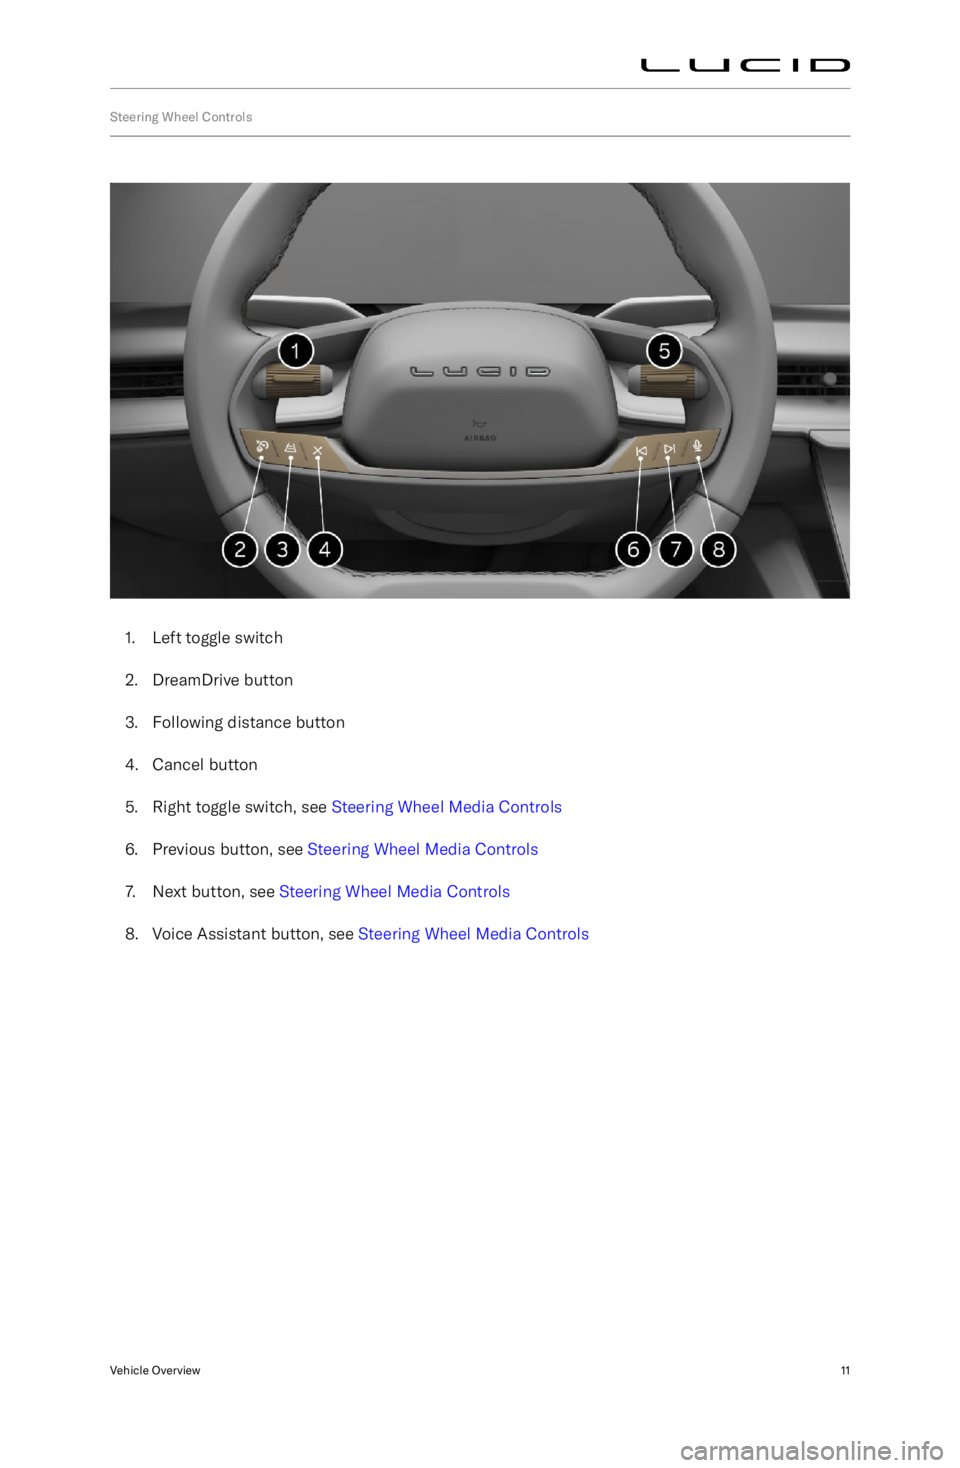 LUCID AIR 2022  Owners Manual Steering Wheel Controls
1. Left toggle switch
2. DreamDrive button
3. Following distance button
4. Cancel button
5. Right  toggle switch, see  Steering Wheel Media Controls
6. Previous button, see  St